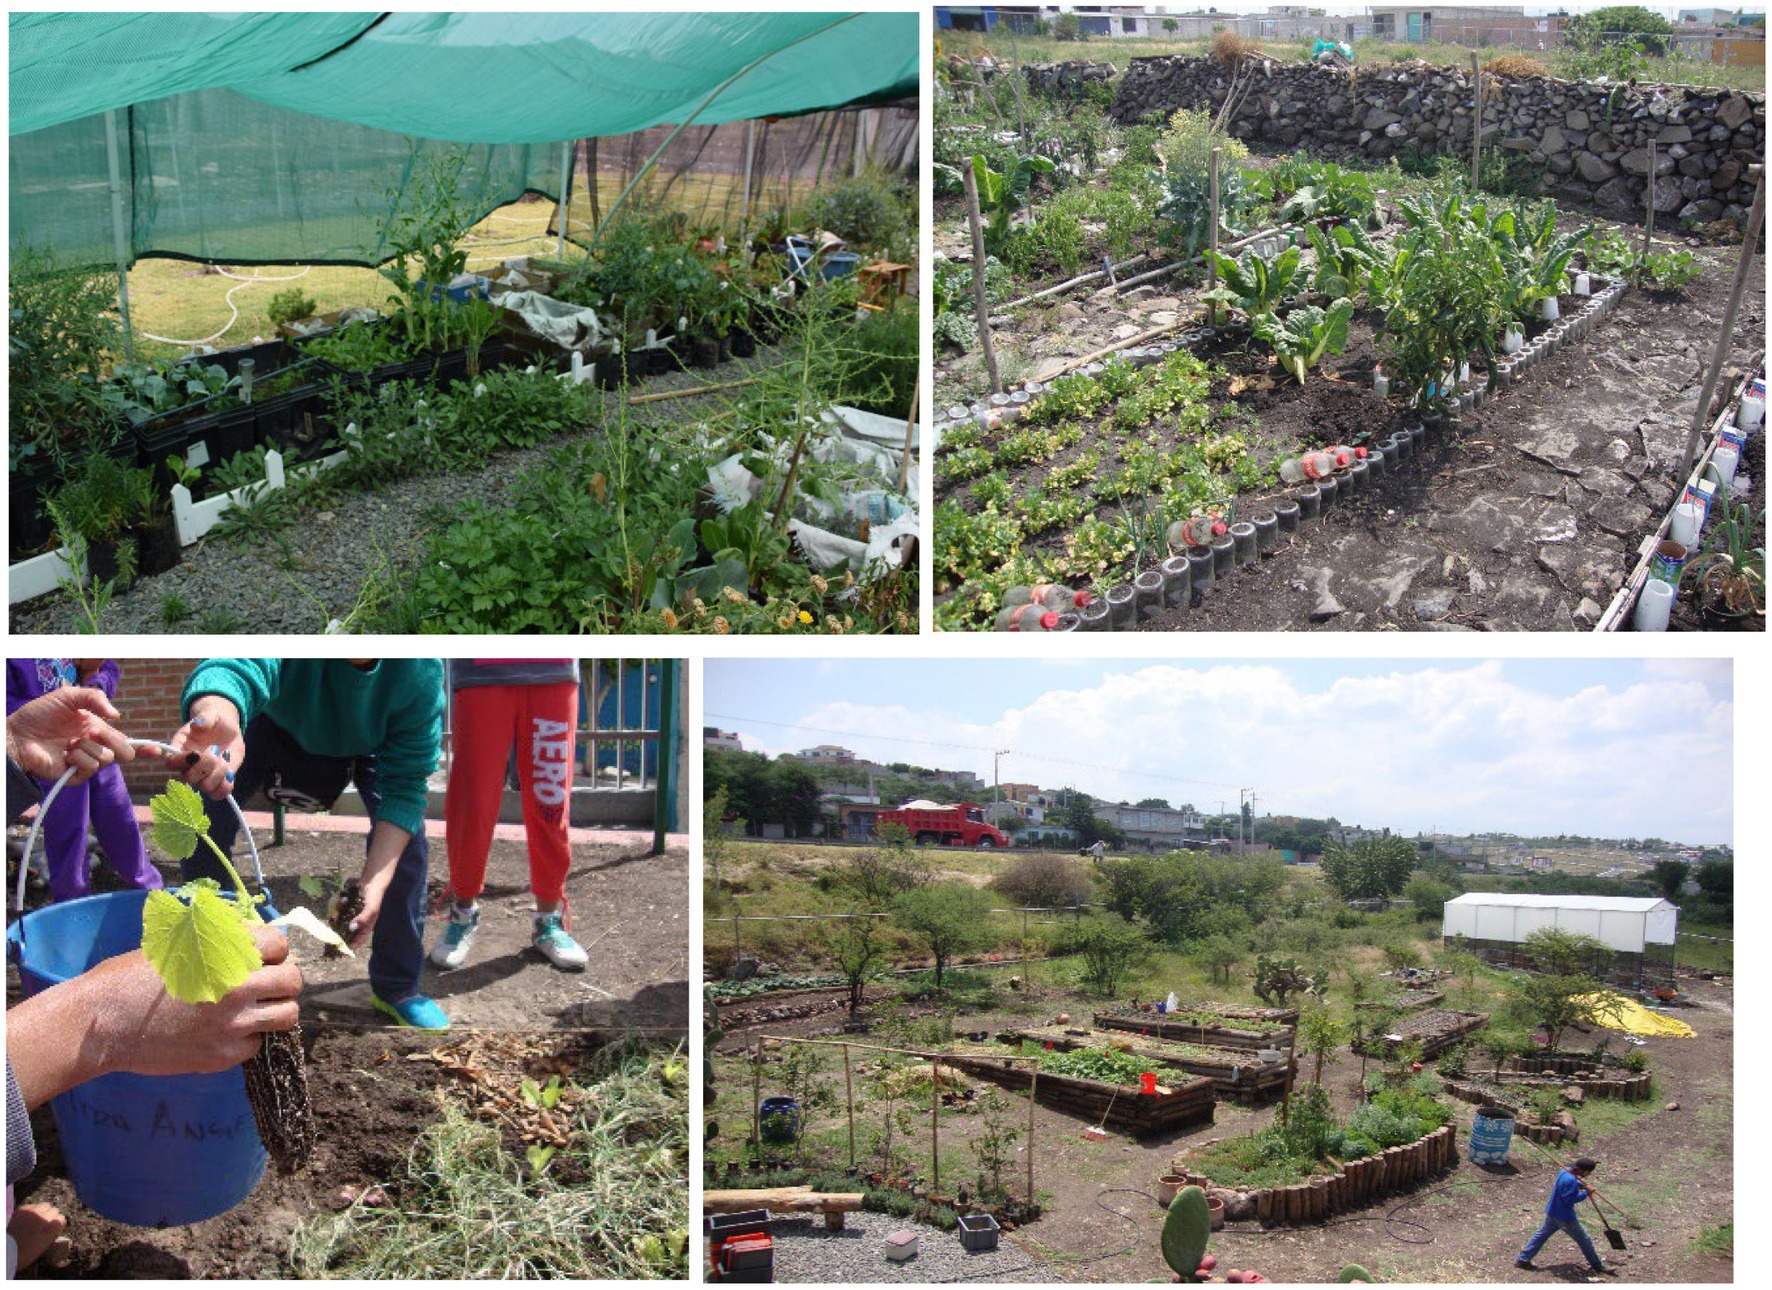 Frontiers  Urban agroecology enhances agrobiodiversity and resilient,  biocultural food systems. The case of the semi-dryland and medium-sized  Querétaro City, Mexico